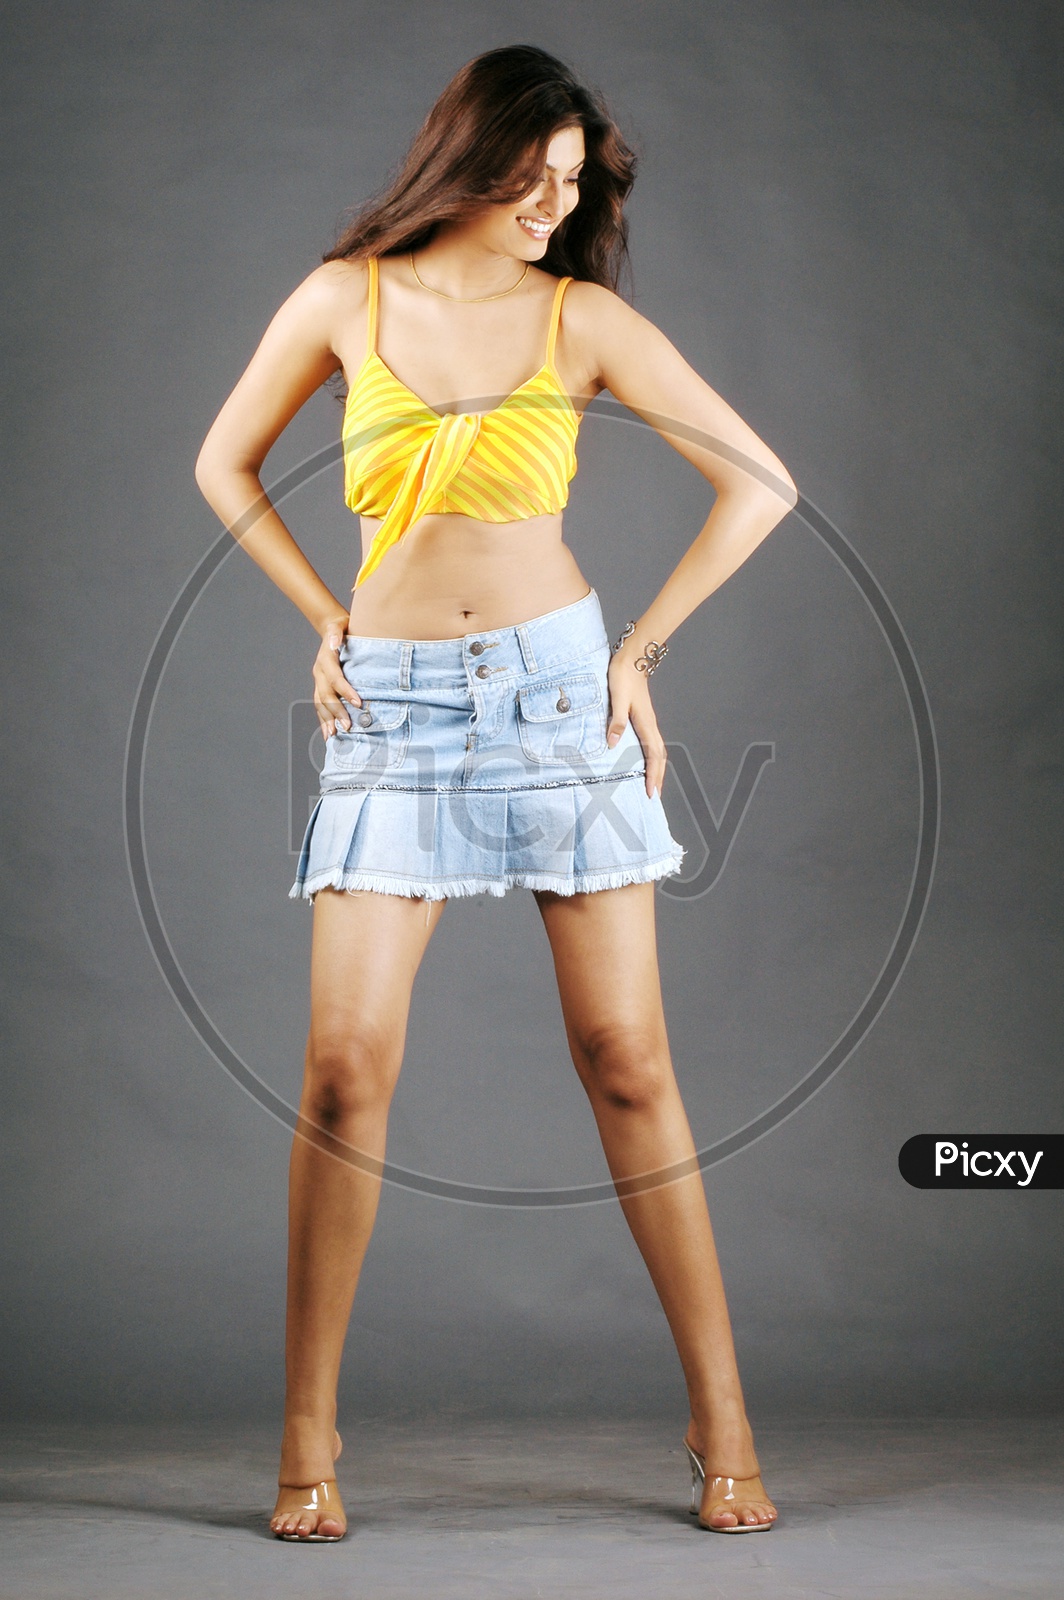 A female model with yellow crop top and frill blue mini skirt posing in a studio